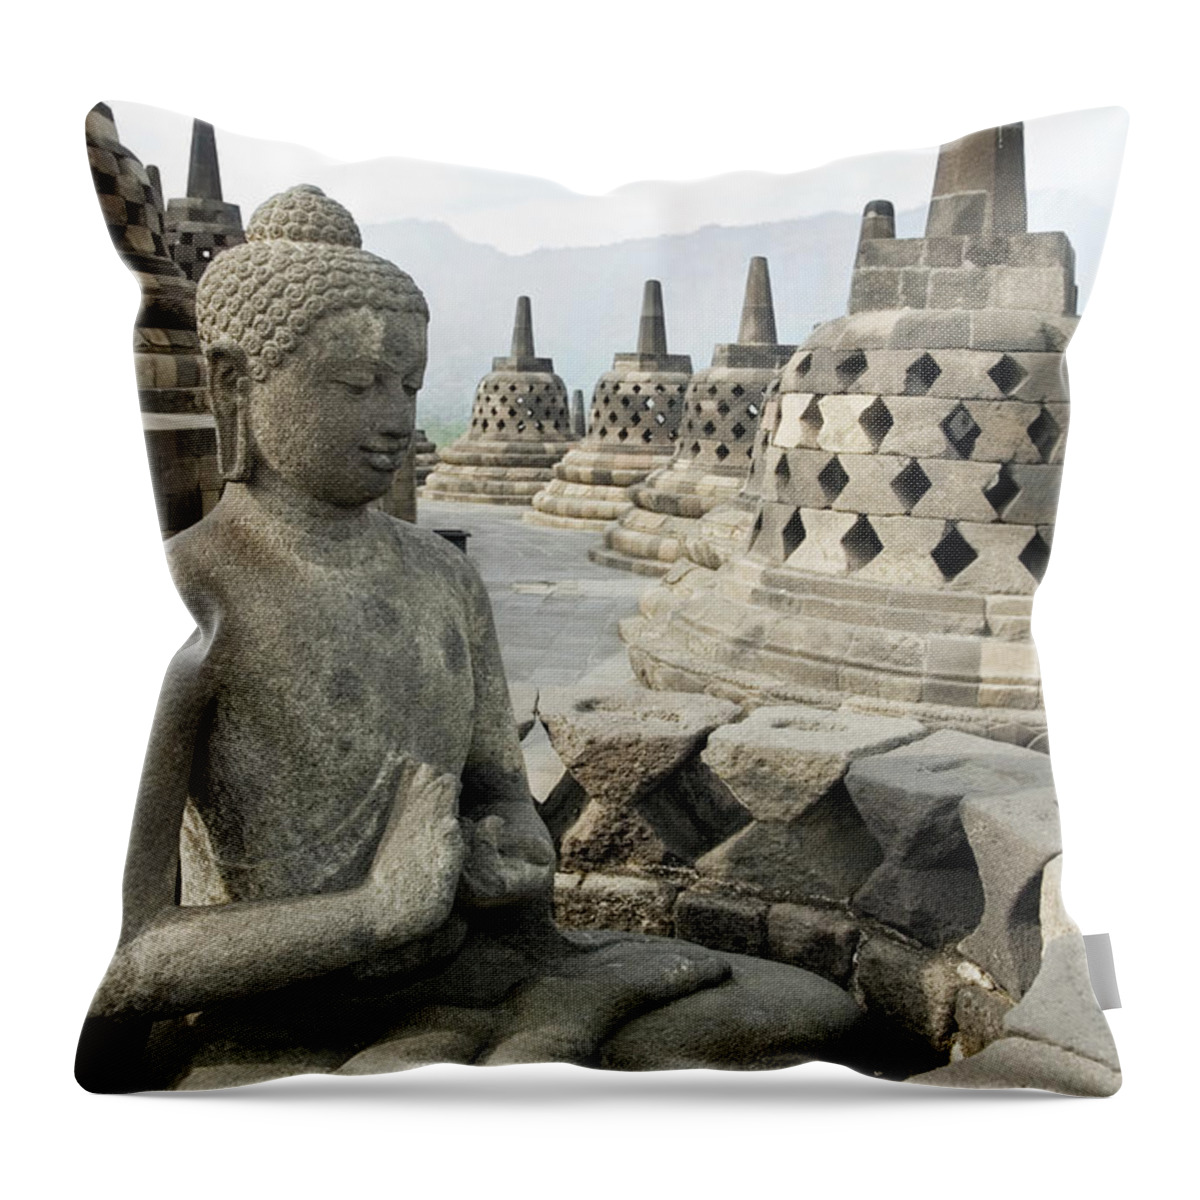 Art Throw Pillow featuring the photograph Borobudur Java Indonesia by Lp7